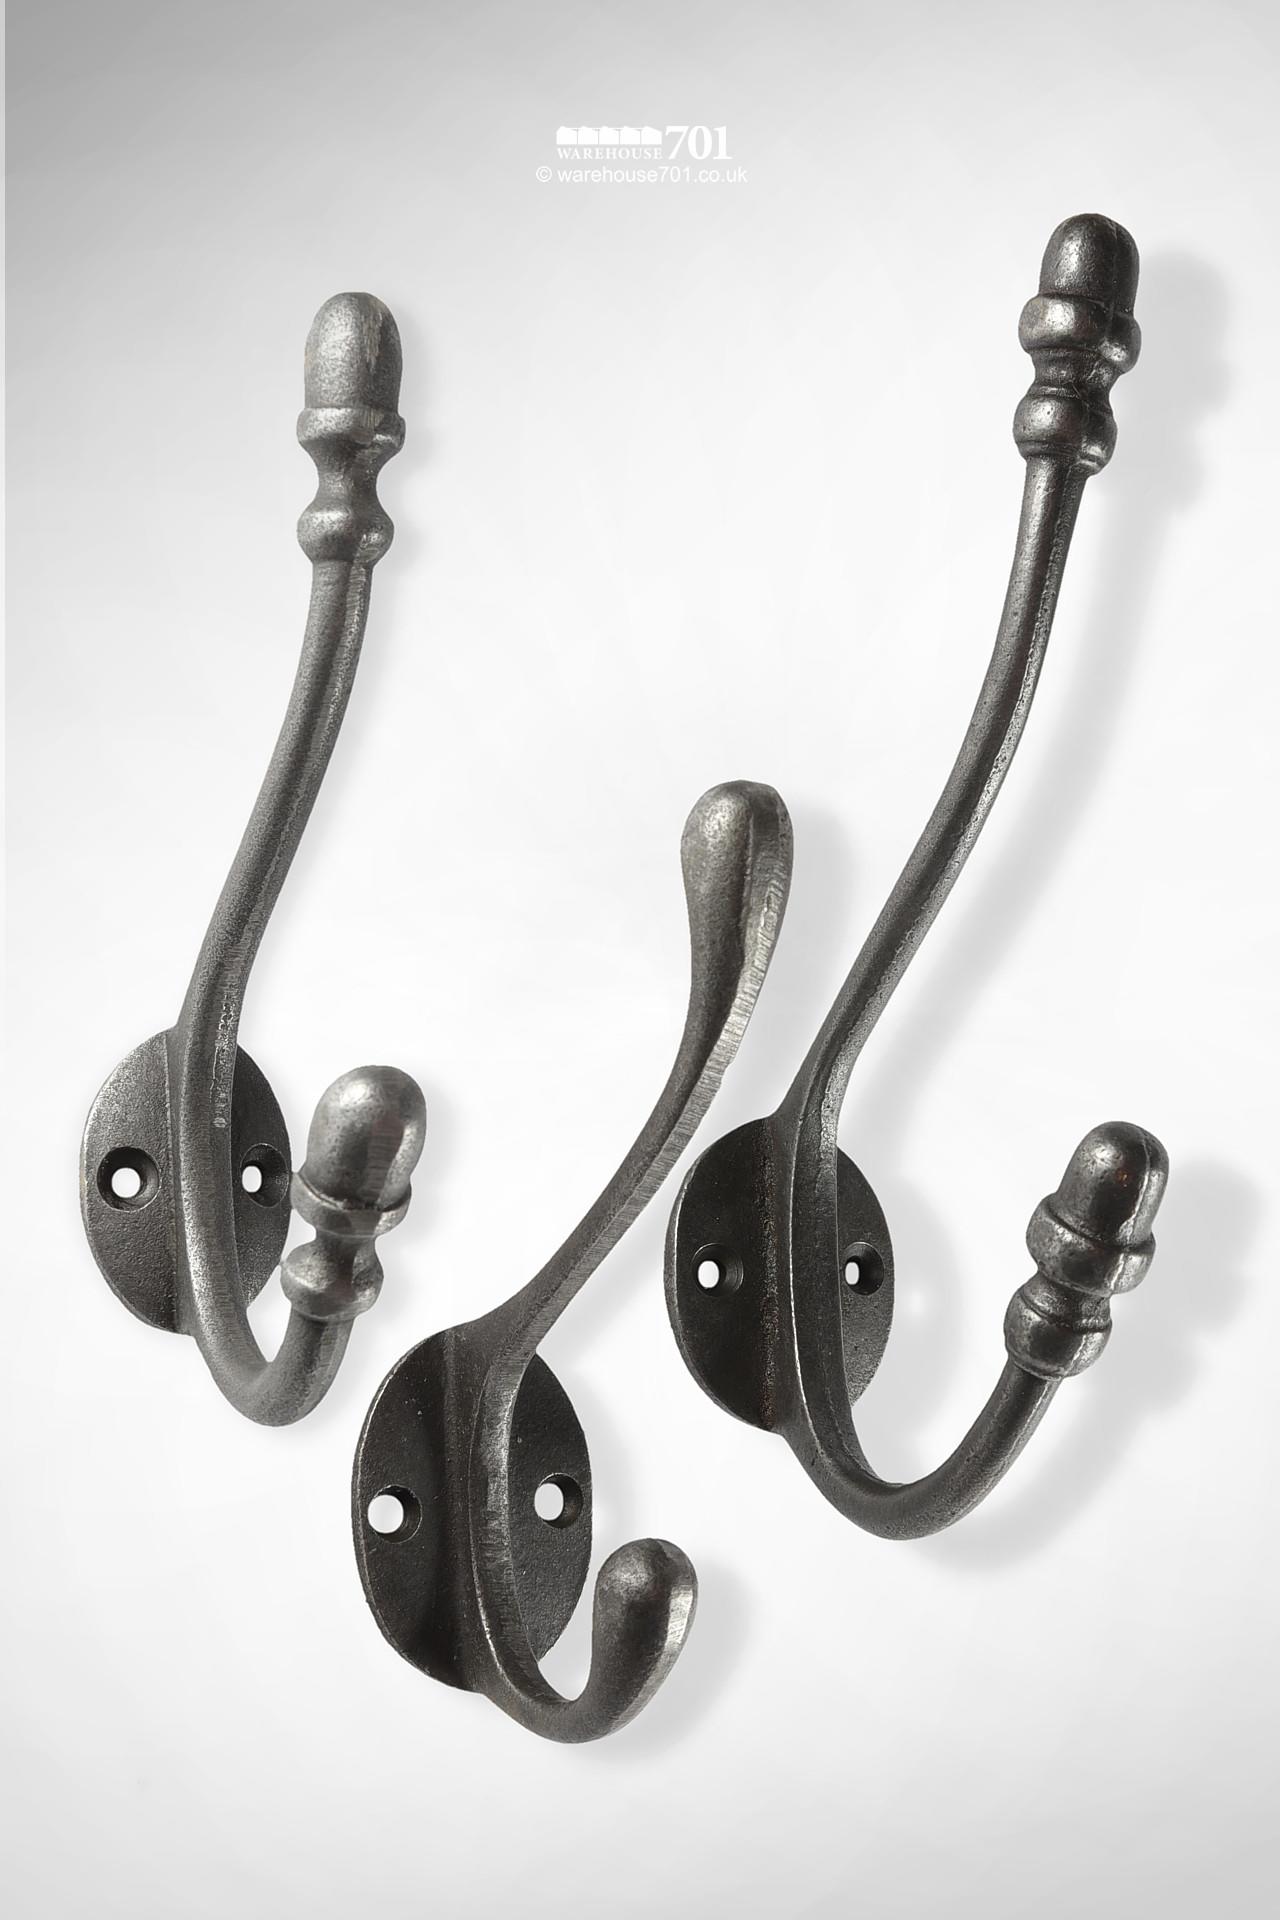 New Cast Iron Small Double Coat Hook with Acorn Finials #3